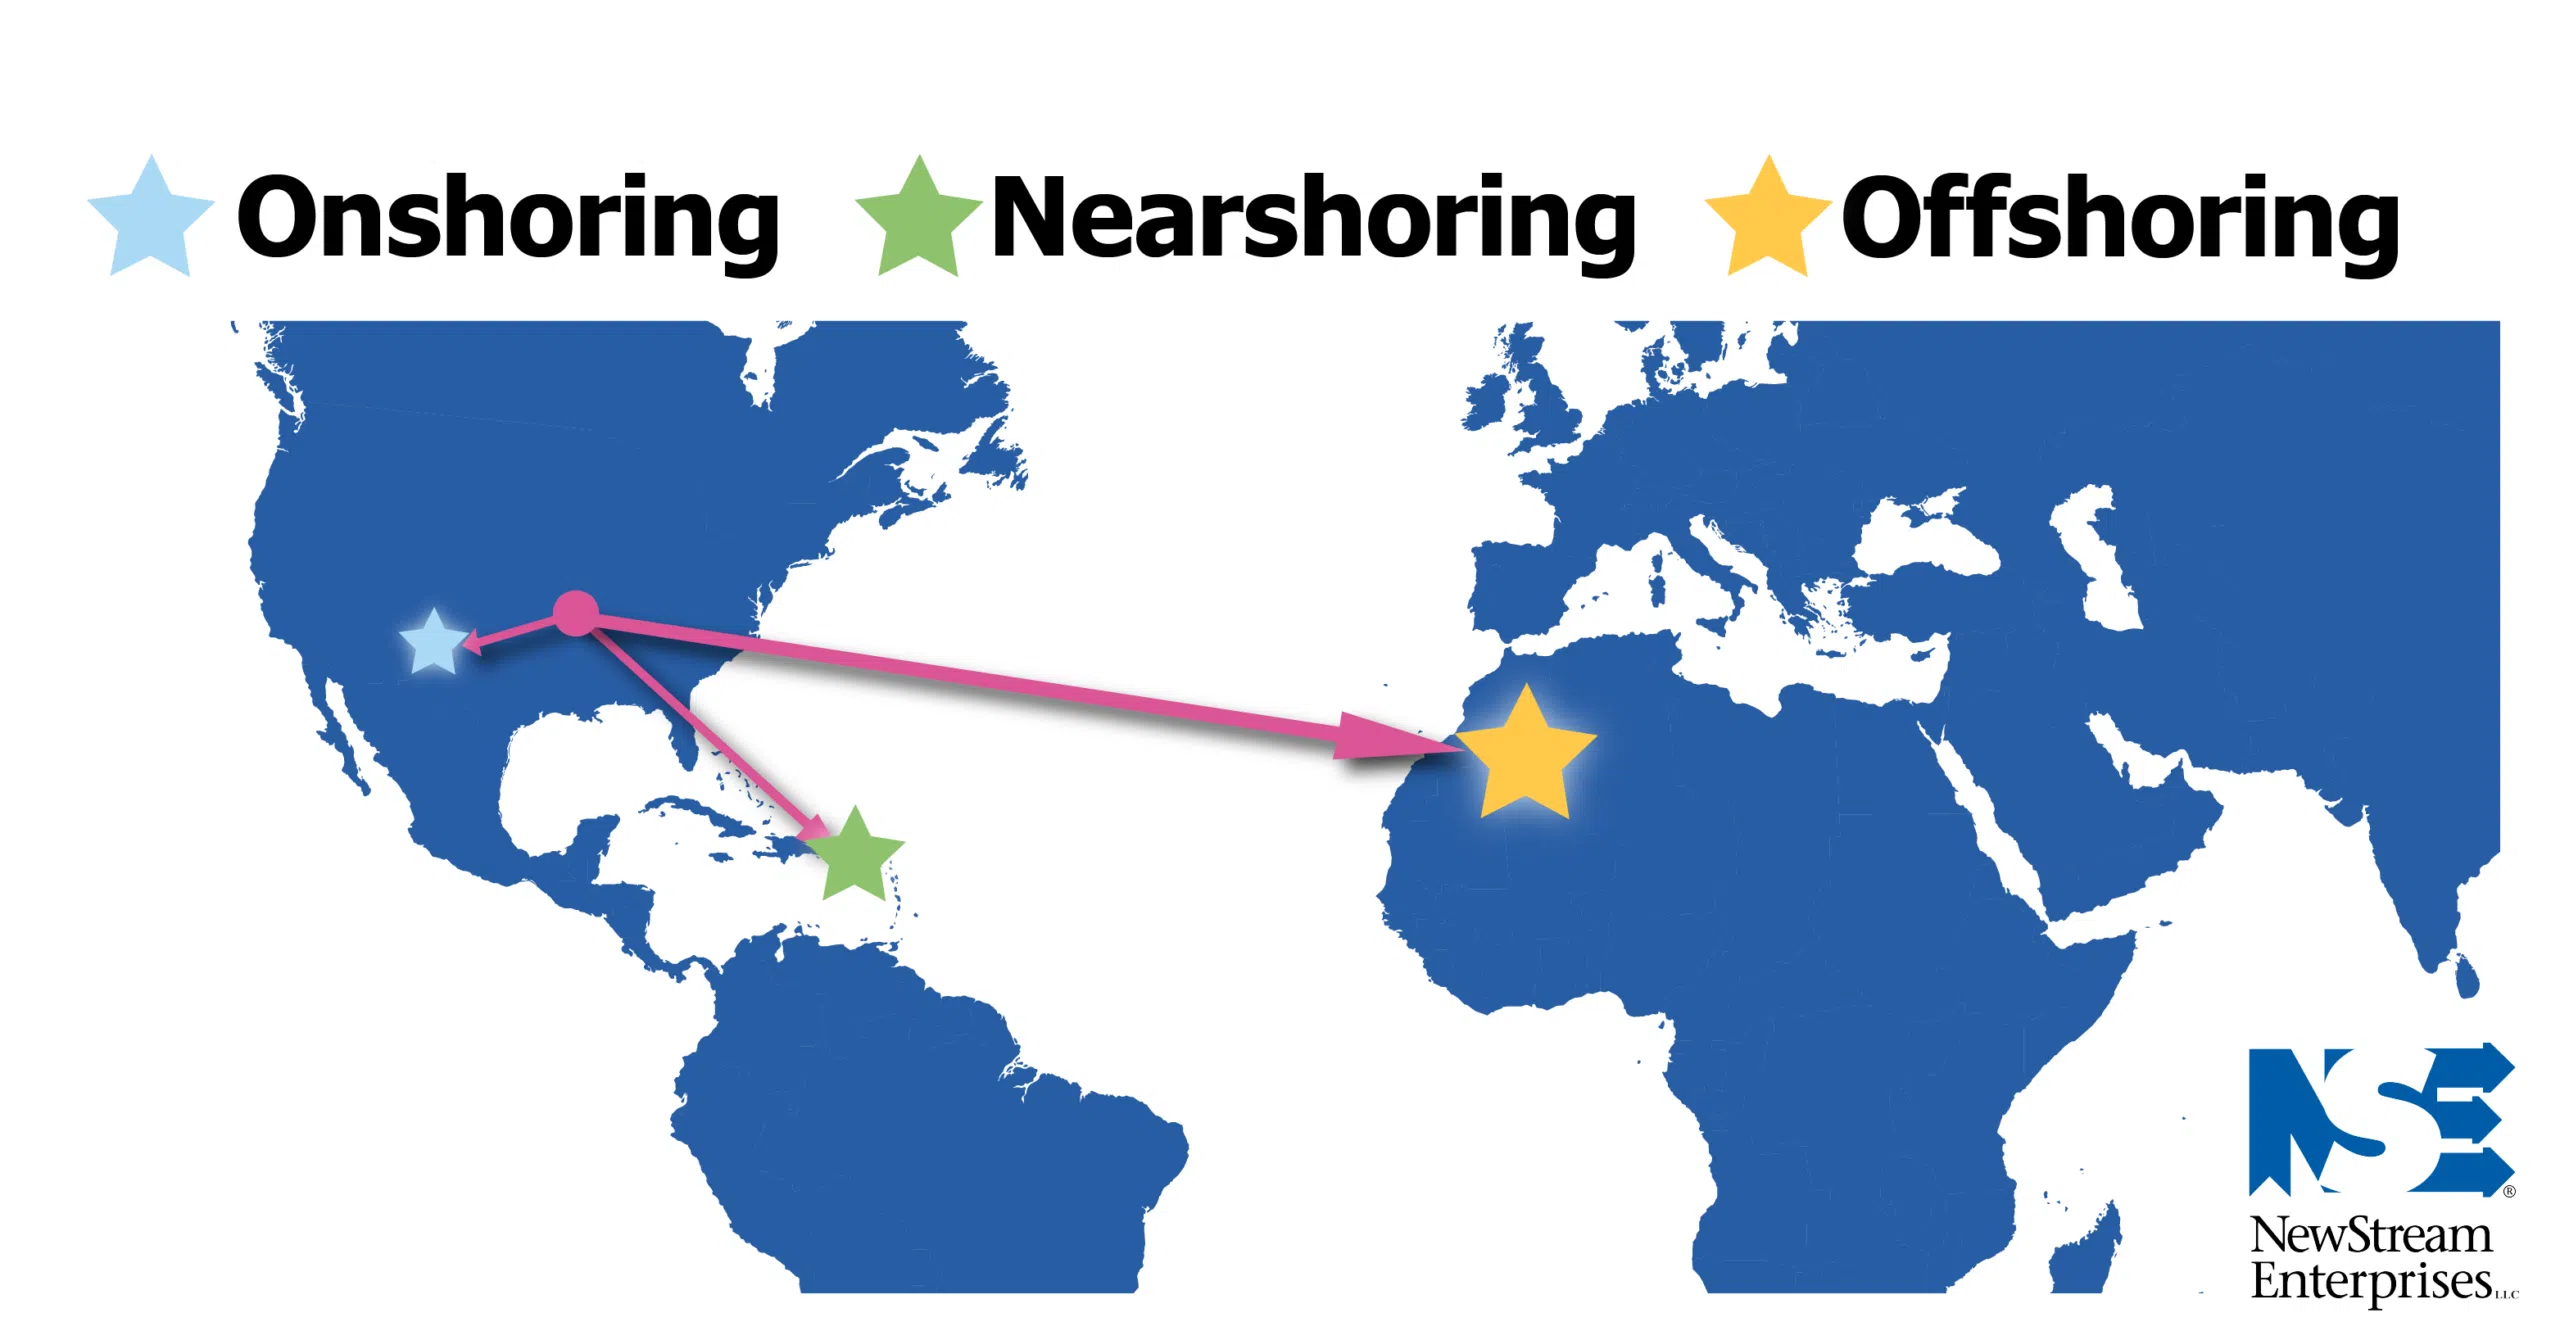 Nearshoring is all about outsourcing in close proximity to your location. 